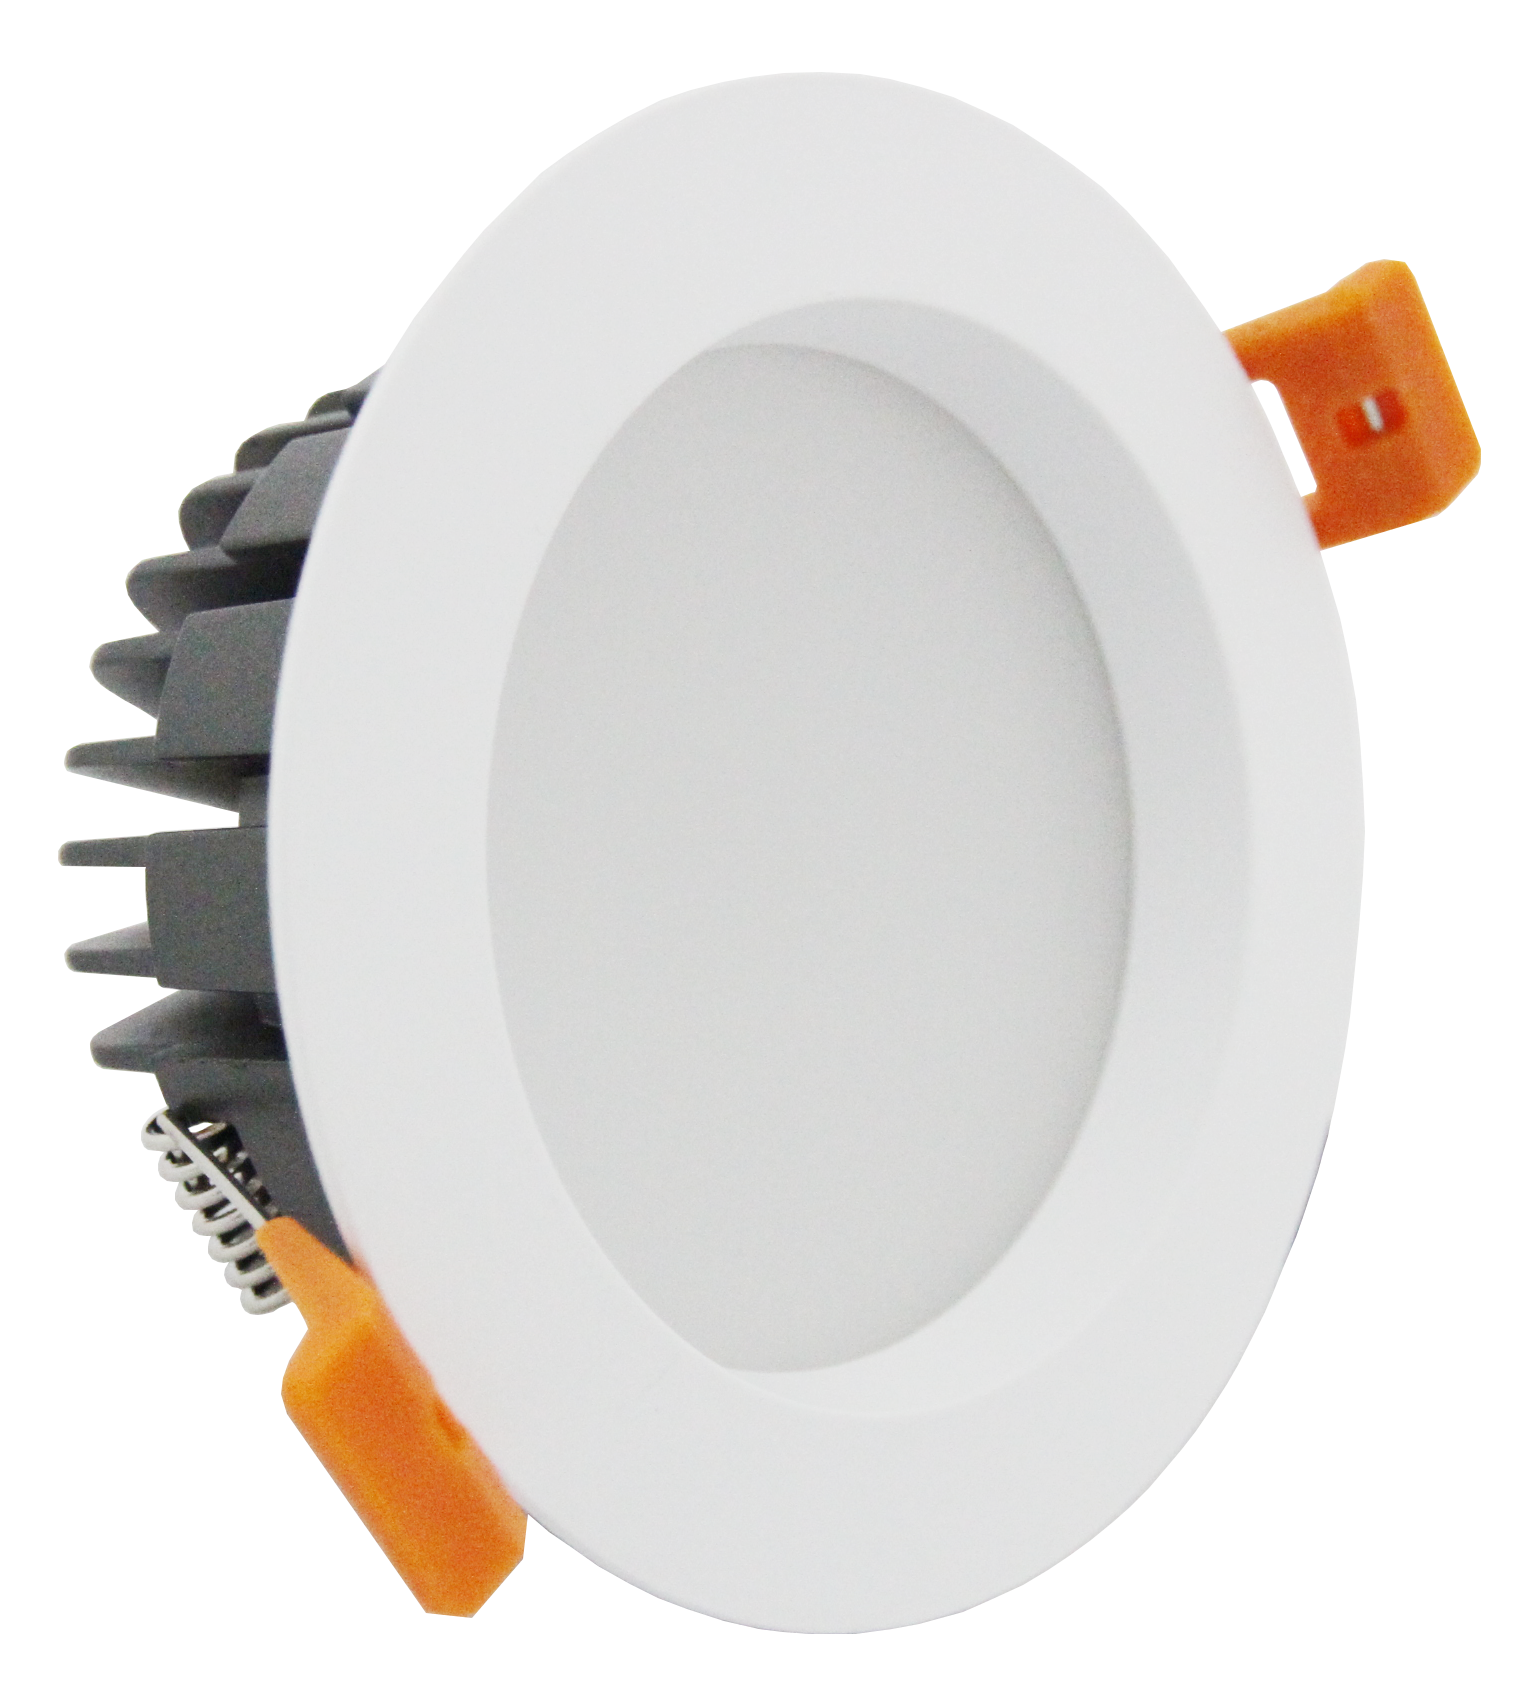 JustLED - IP44 LED Ceiling Downlight [Energy Class A+]